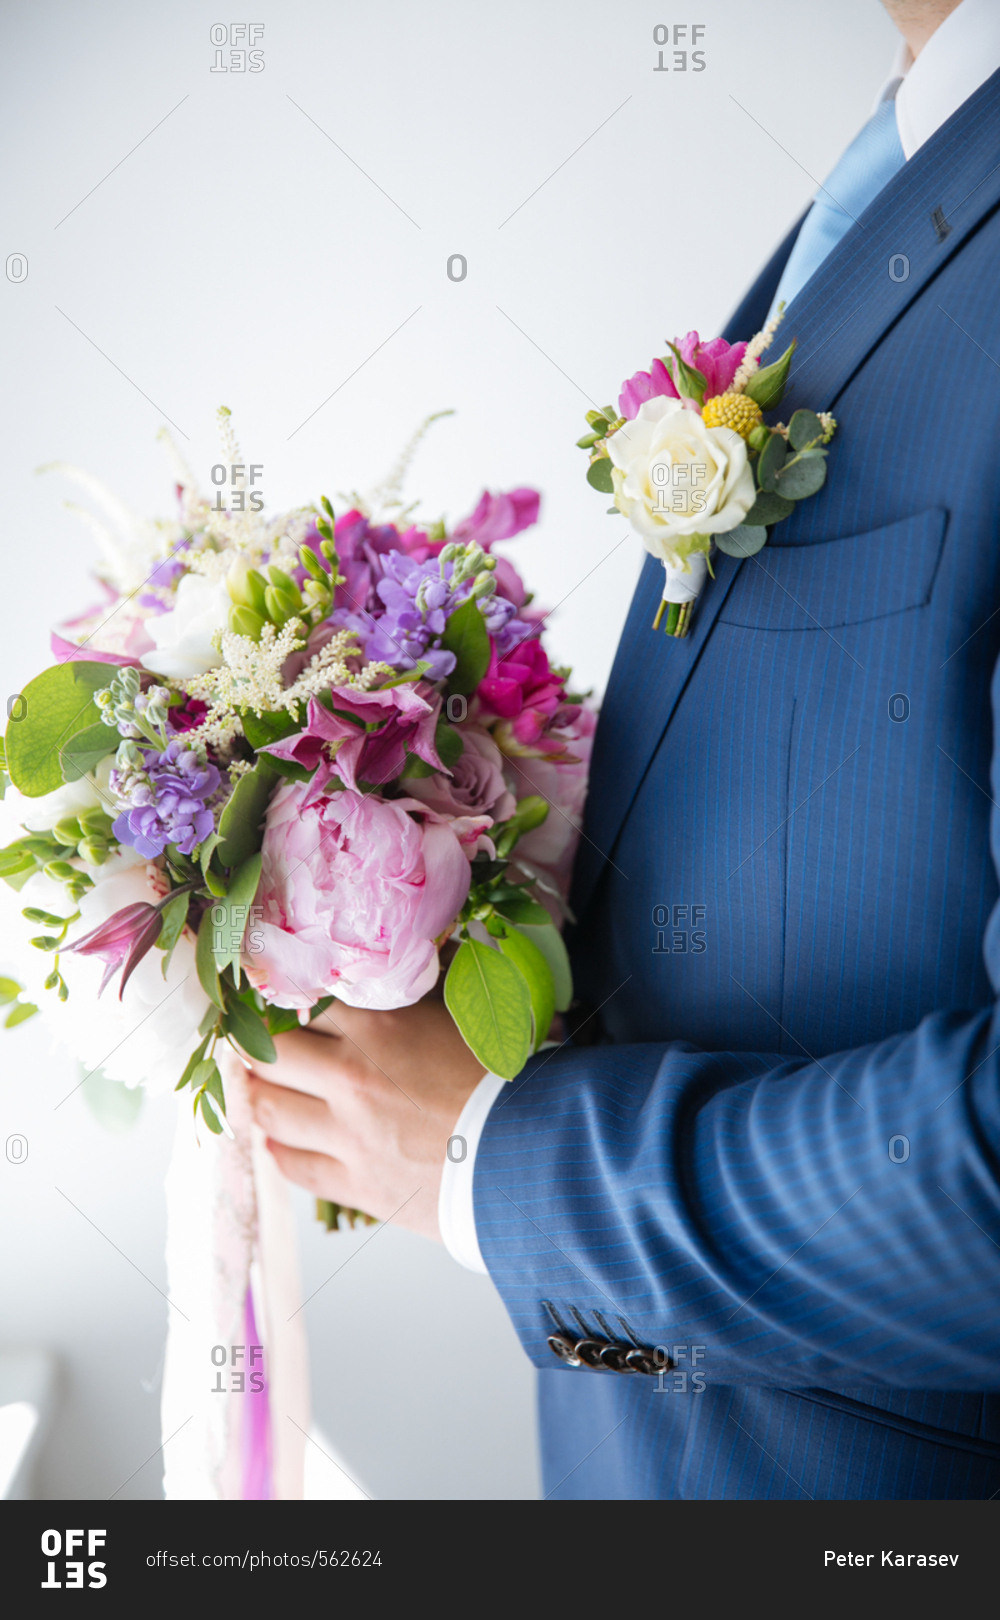 Groom holding a bouquet of purple and pink flowers